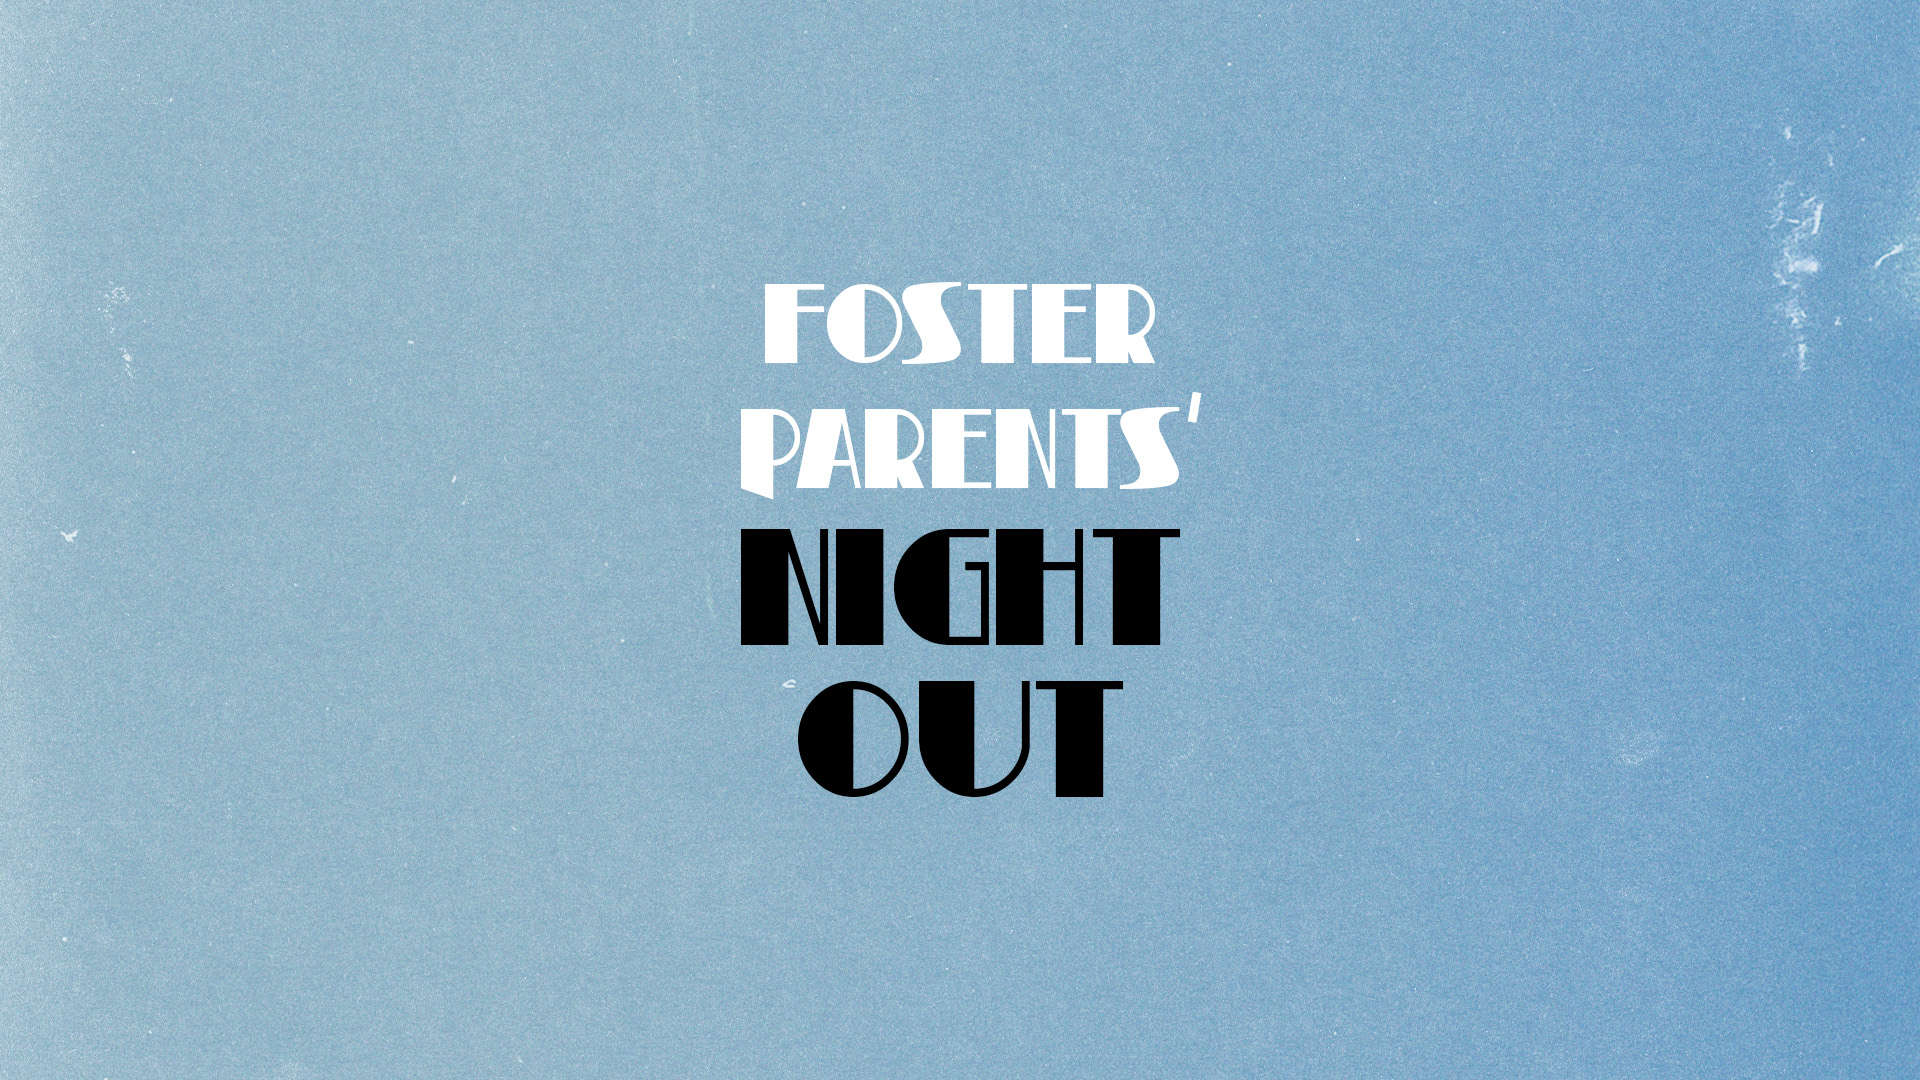 foster parents' night out website